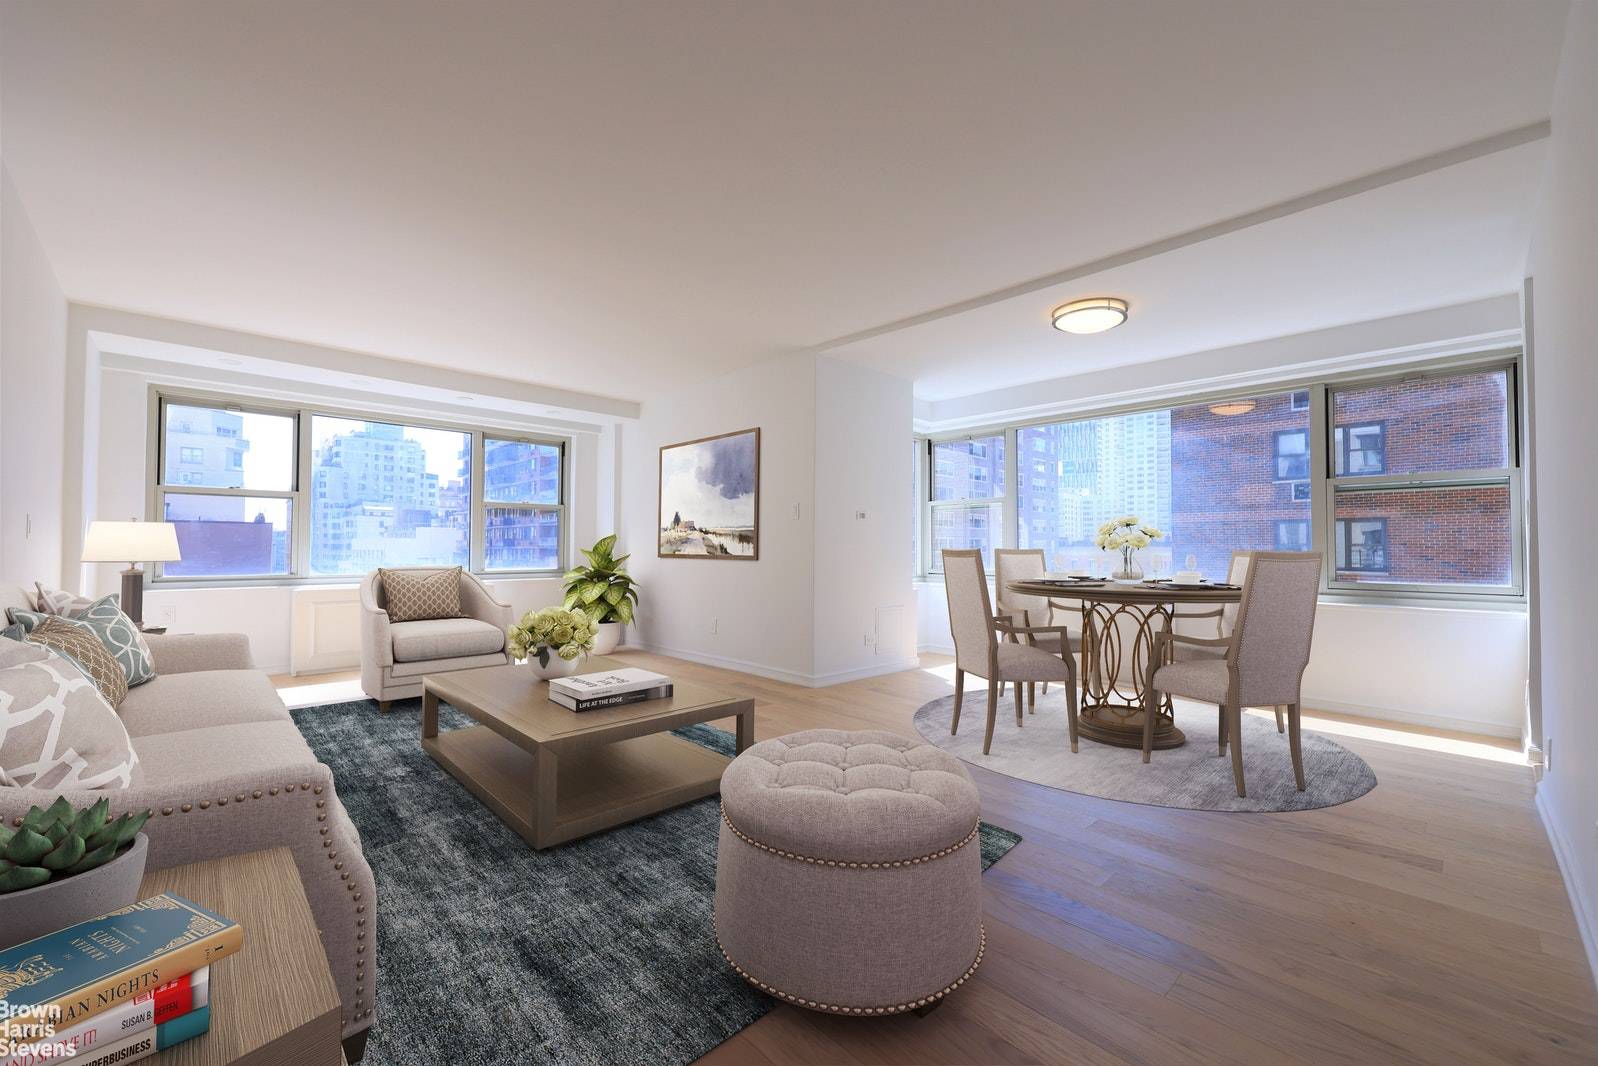 Welcome home to a newly renovated large four bedroom, three bathroom on lovely East 80th Streetblock.